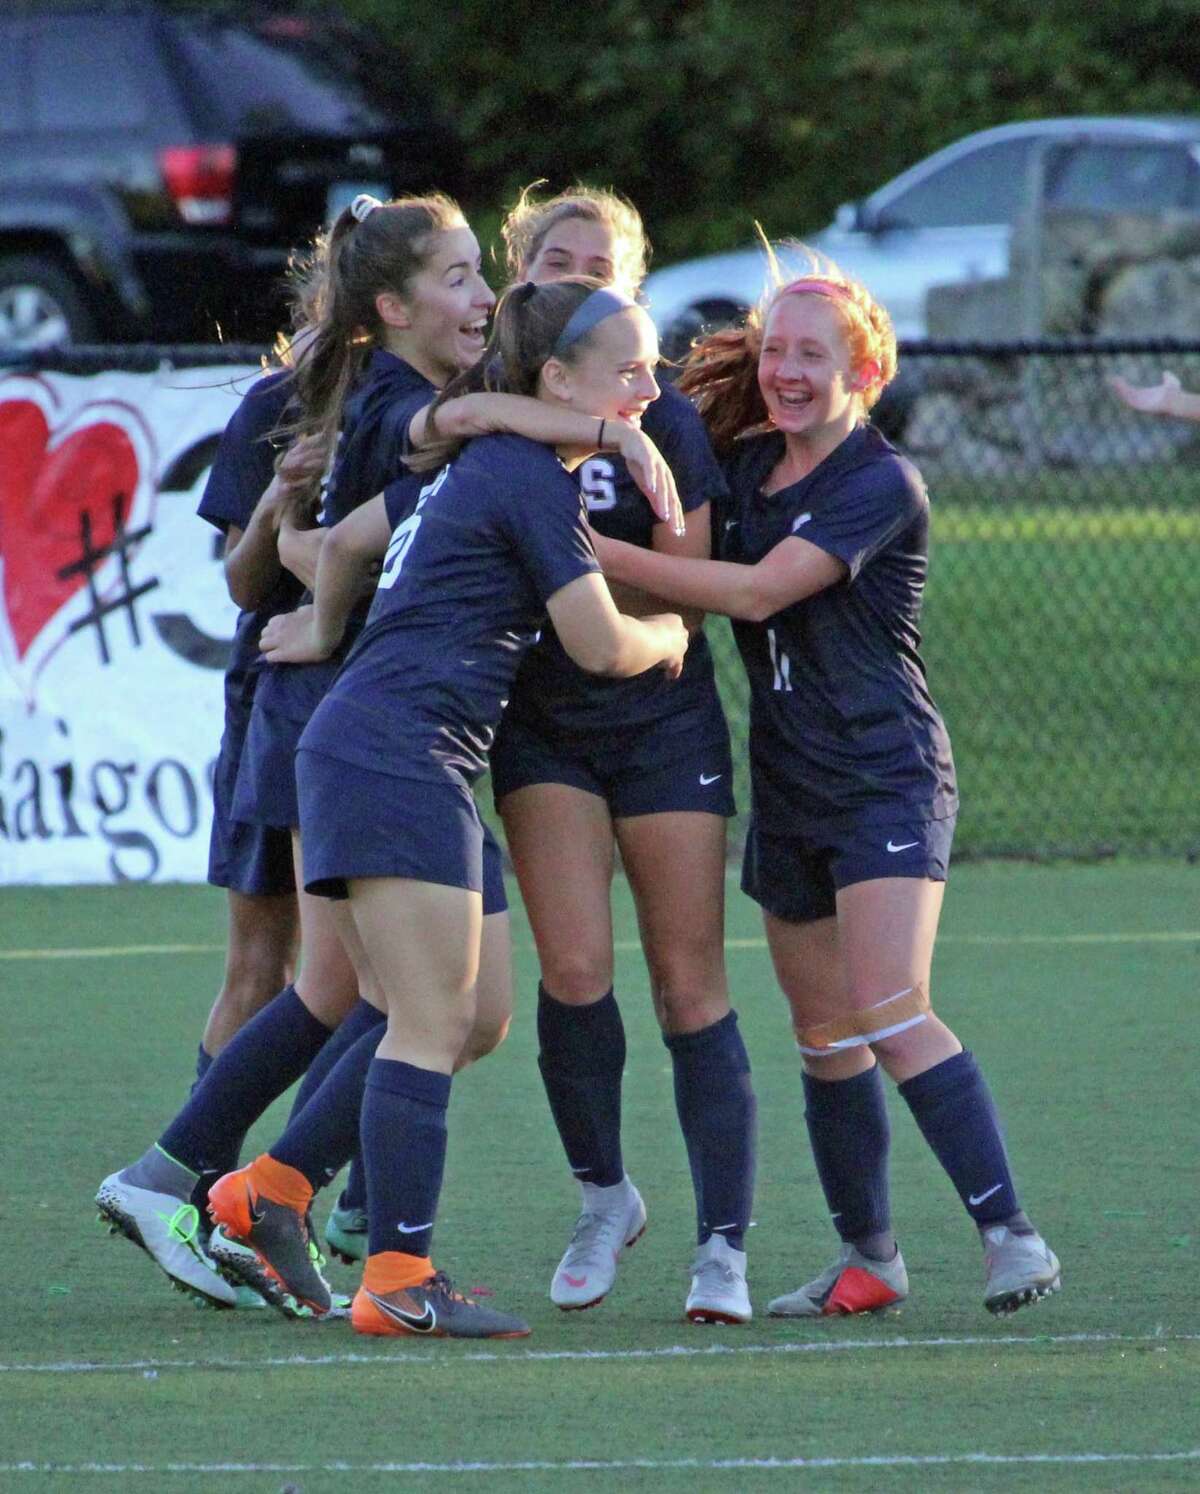 Staples players celebrate a second-half goal during an FCIAC girls soccer match between Darien and Staples on Friday, Oct. 12, 2018 in Westport, Conn. Staples defeated Darien 3-1.